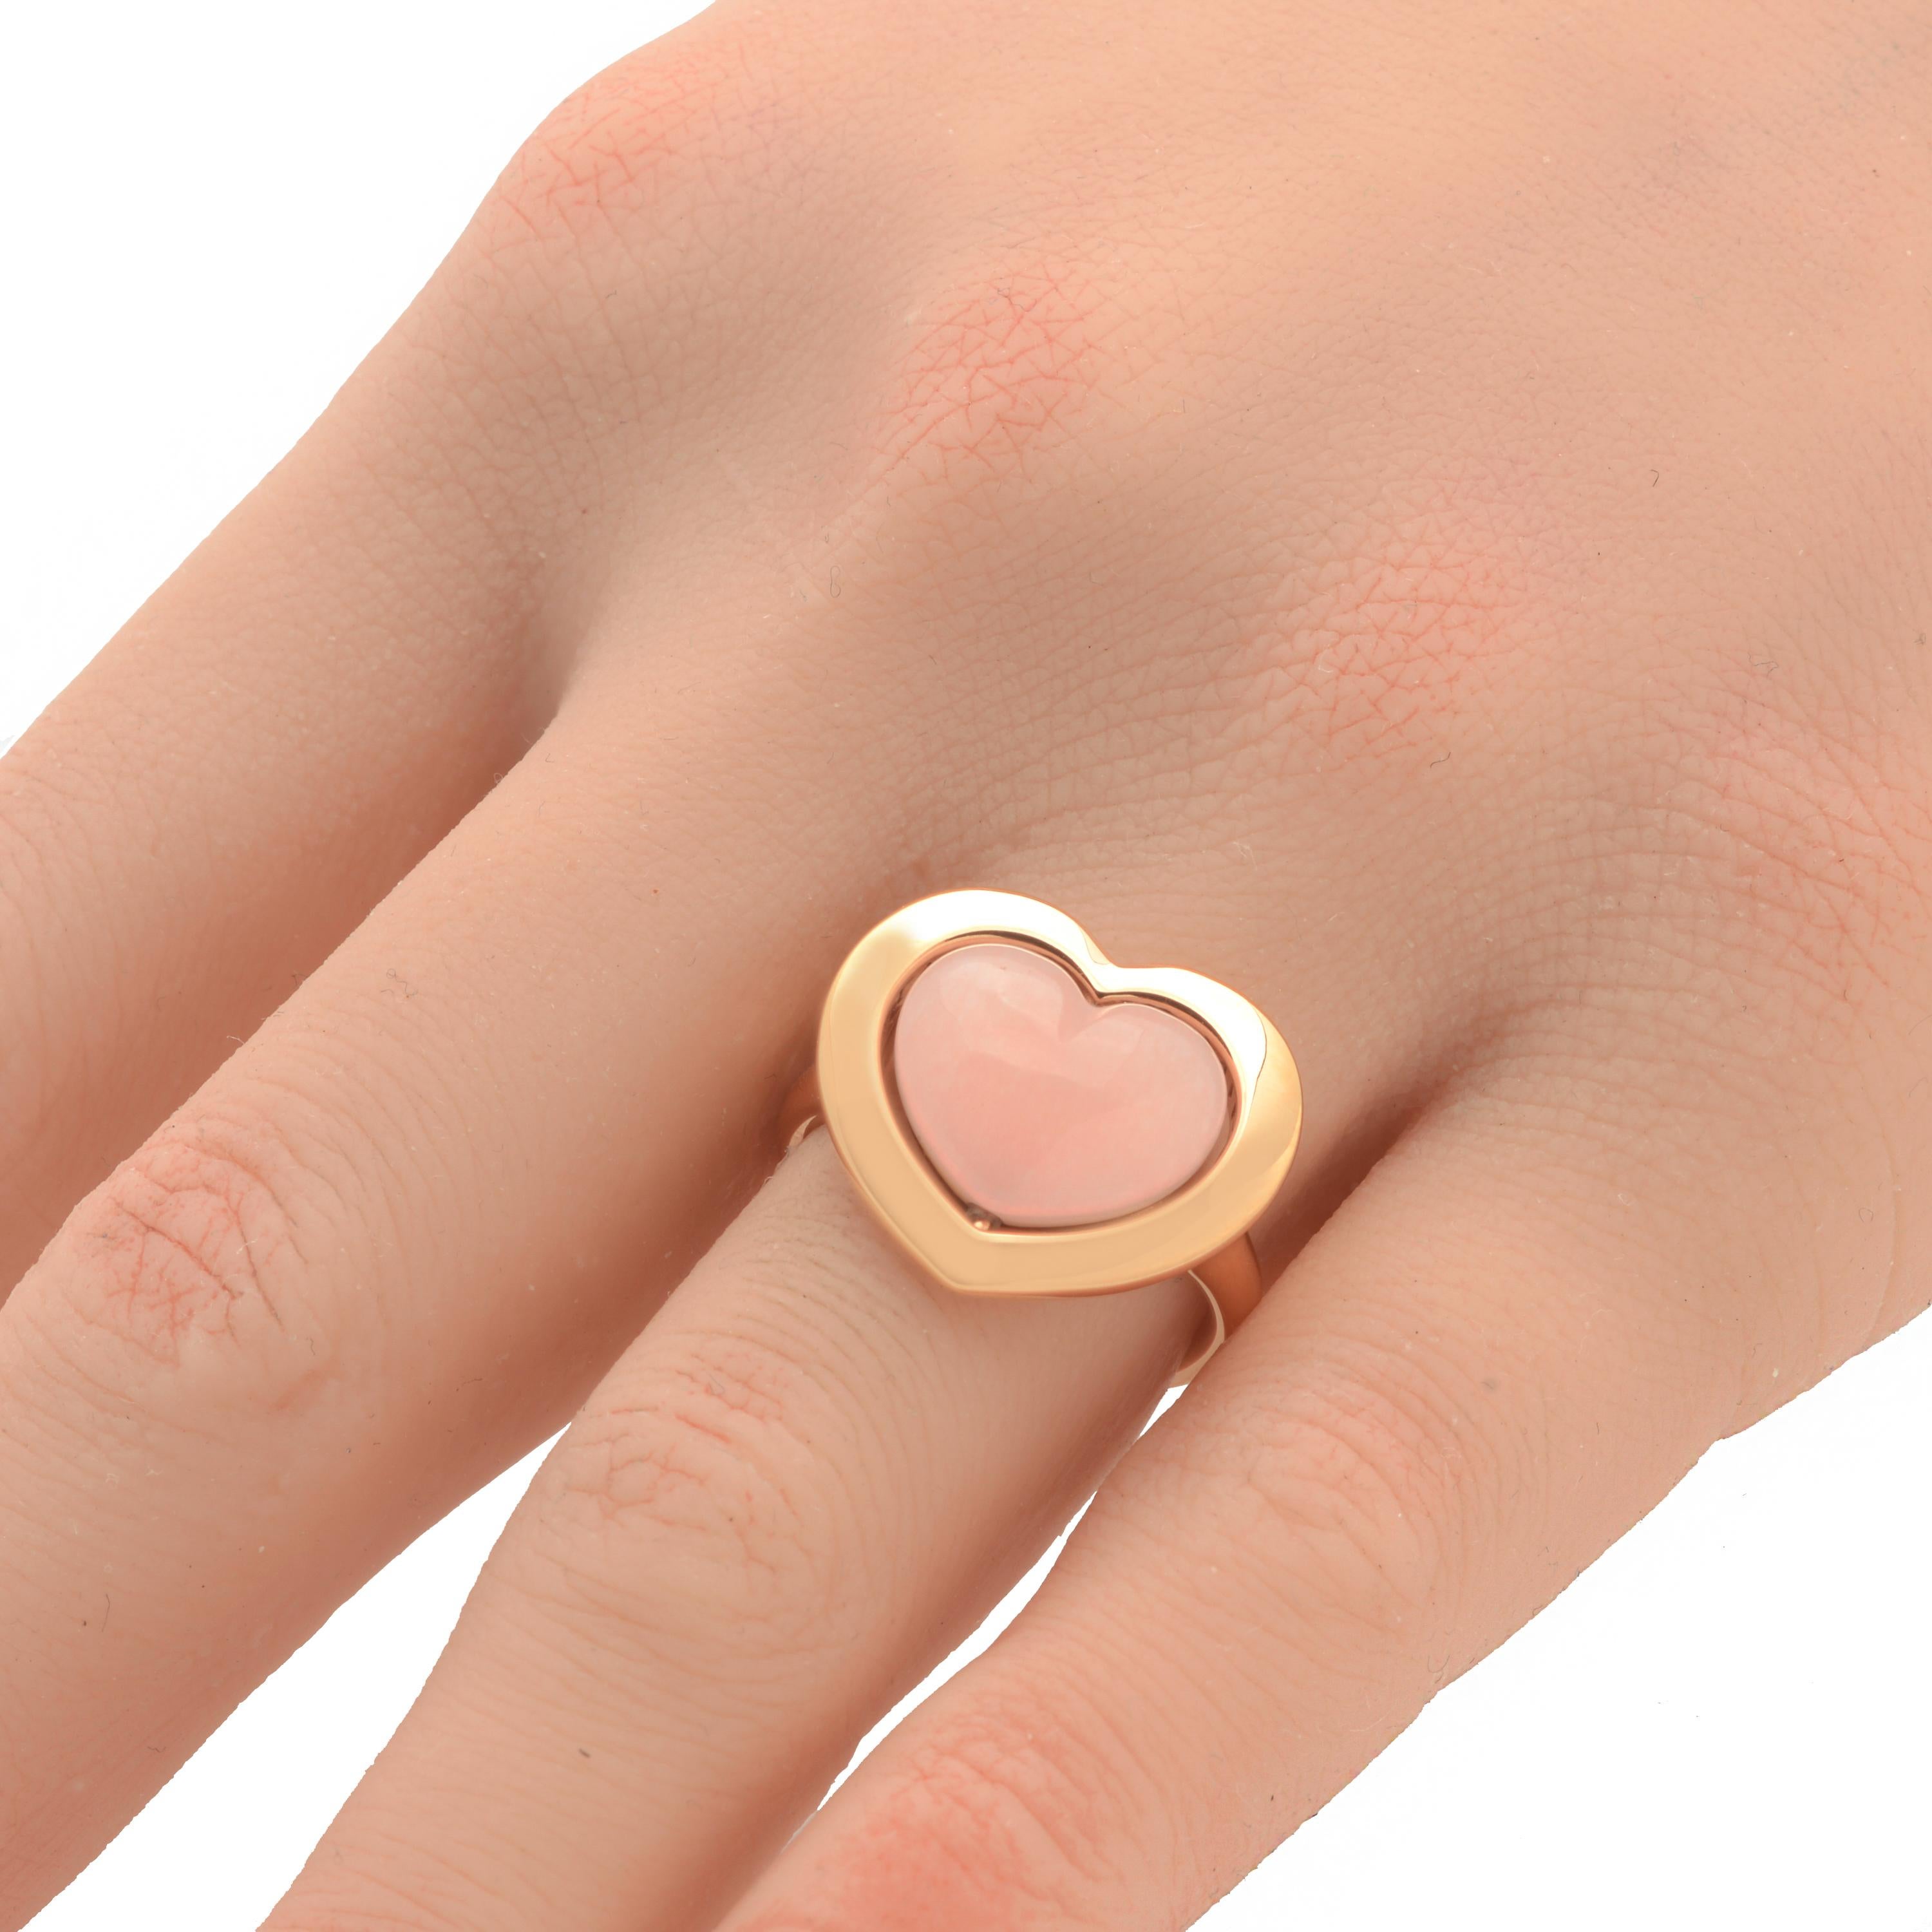 Mimi Milano 18K rose gold cocktail ring features a convex Rose Quartzite heart which can be rotated to reveal a rose gold side that matches a shiny 18K rose gold frame and band. The ring size is 6.25. The decoration size is 3/4